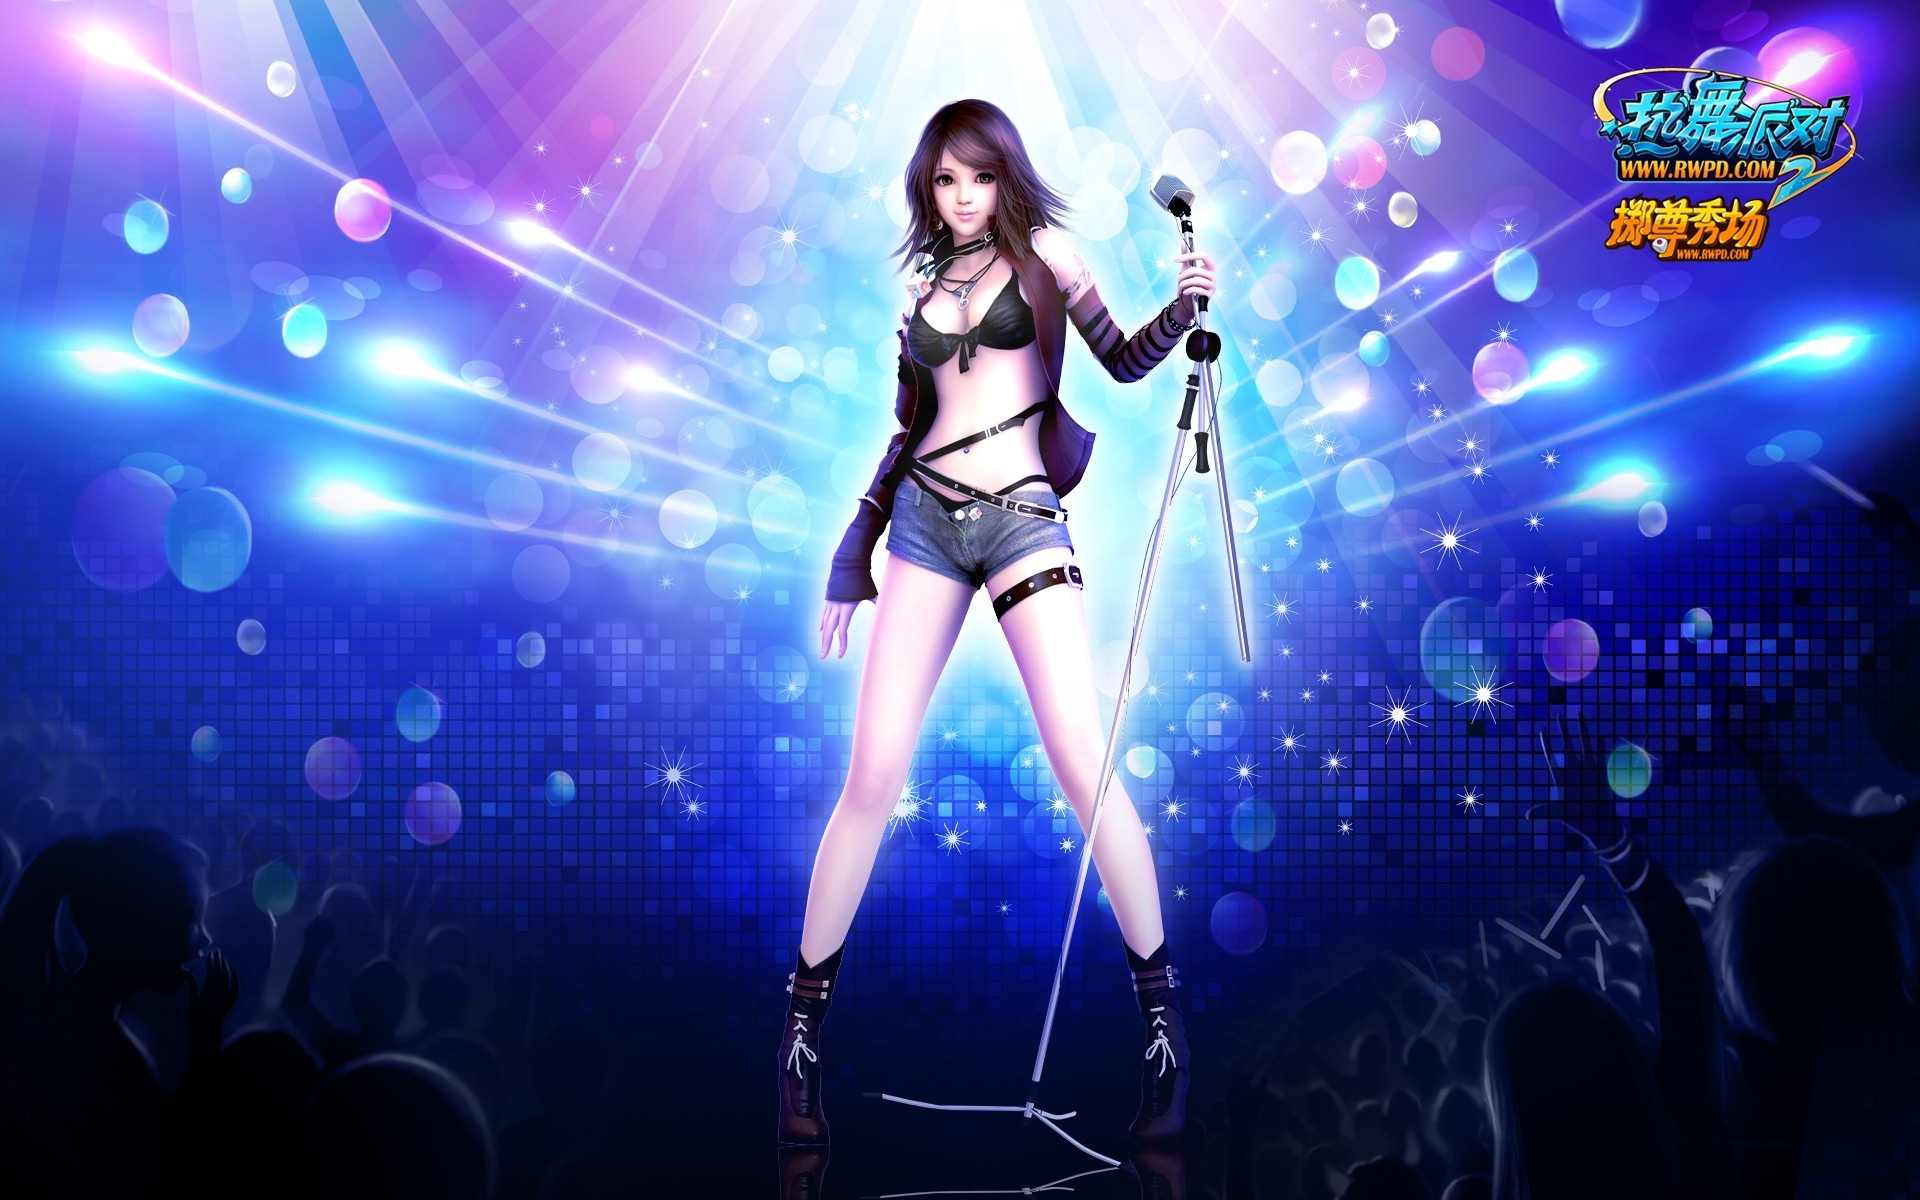 Online game Hot Dance Party II official wallpapers #39 - 1920x1200